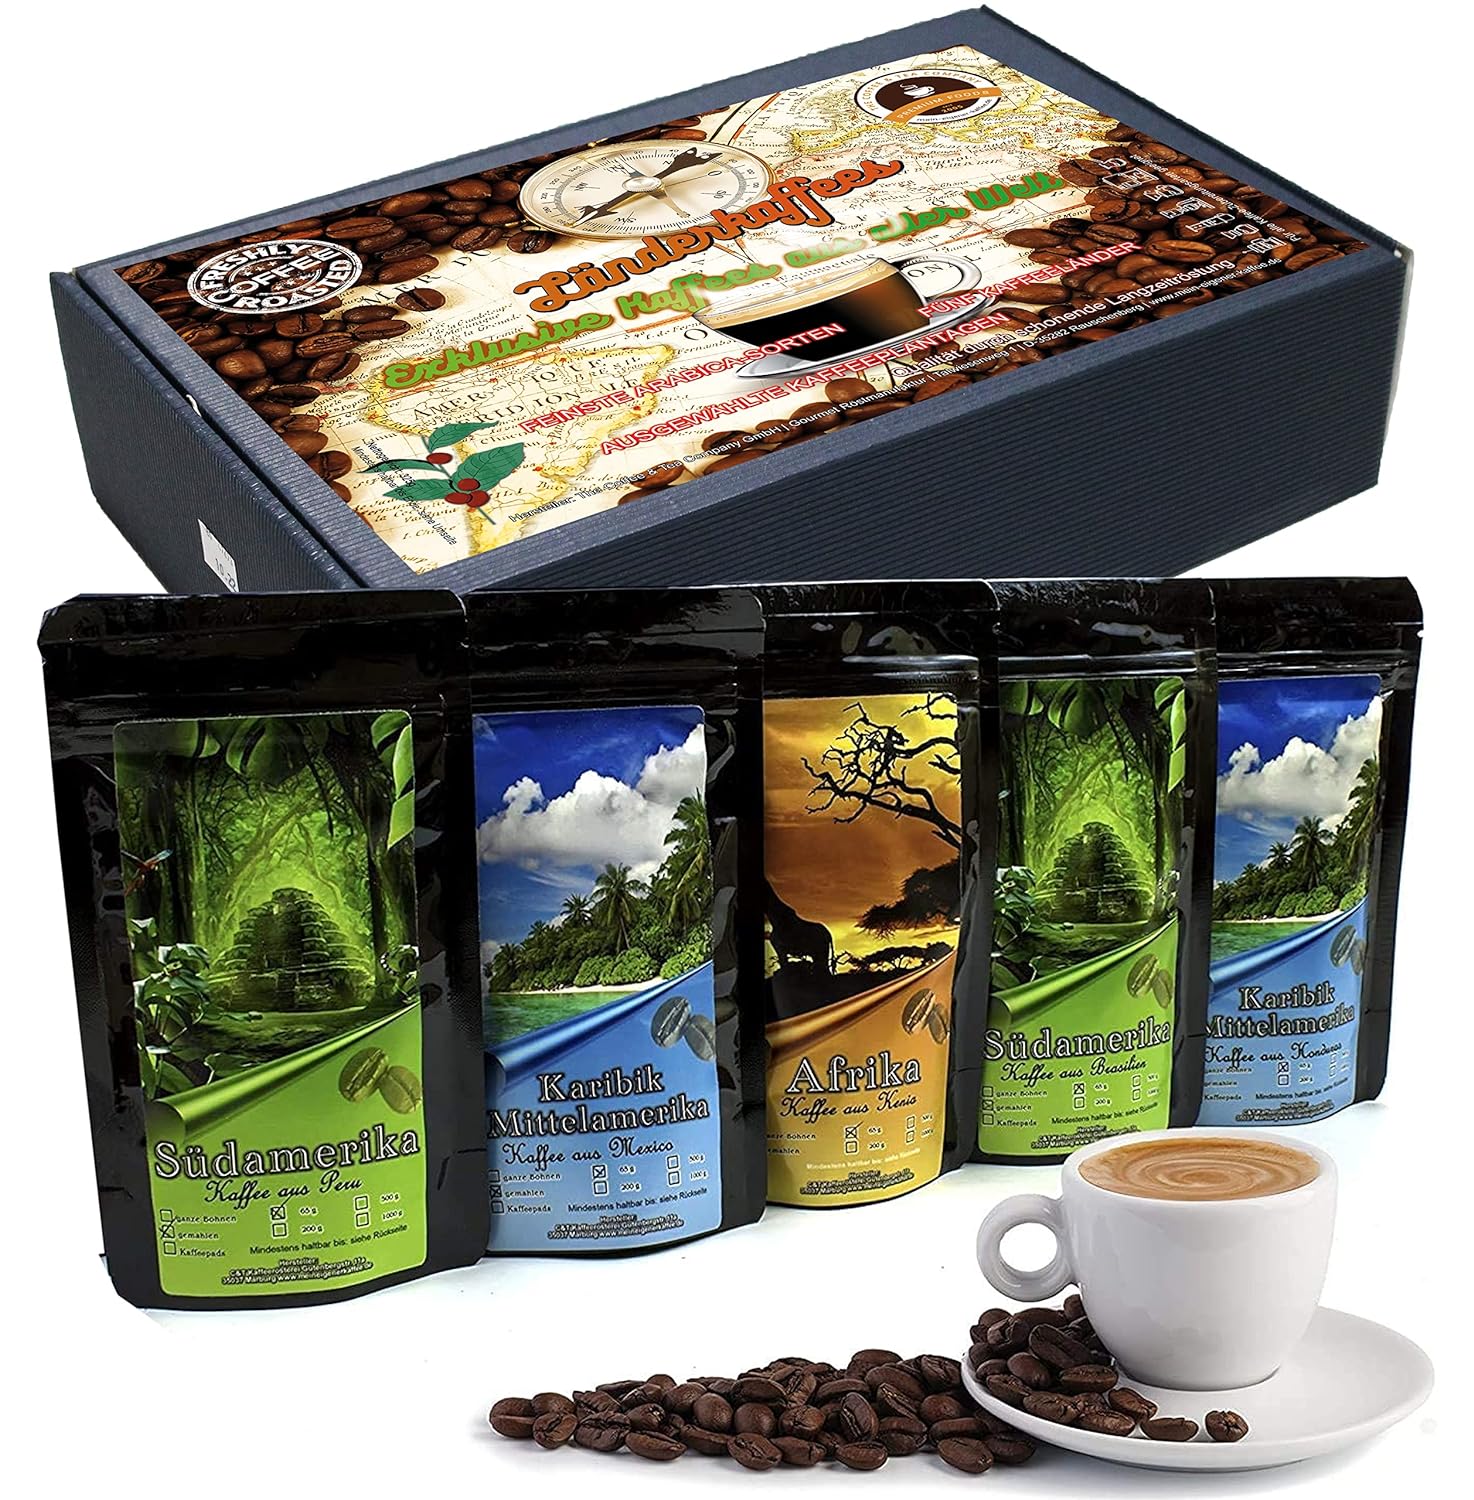 C&T coffee gift set with country coffee from all over the world 5x coffees each 65g entire beans | Brazil + Honduras + Peru + Mexico + Kenya - in the gift box